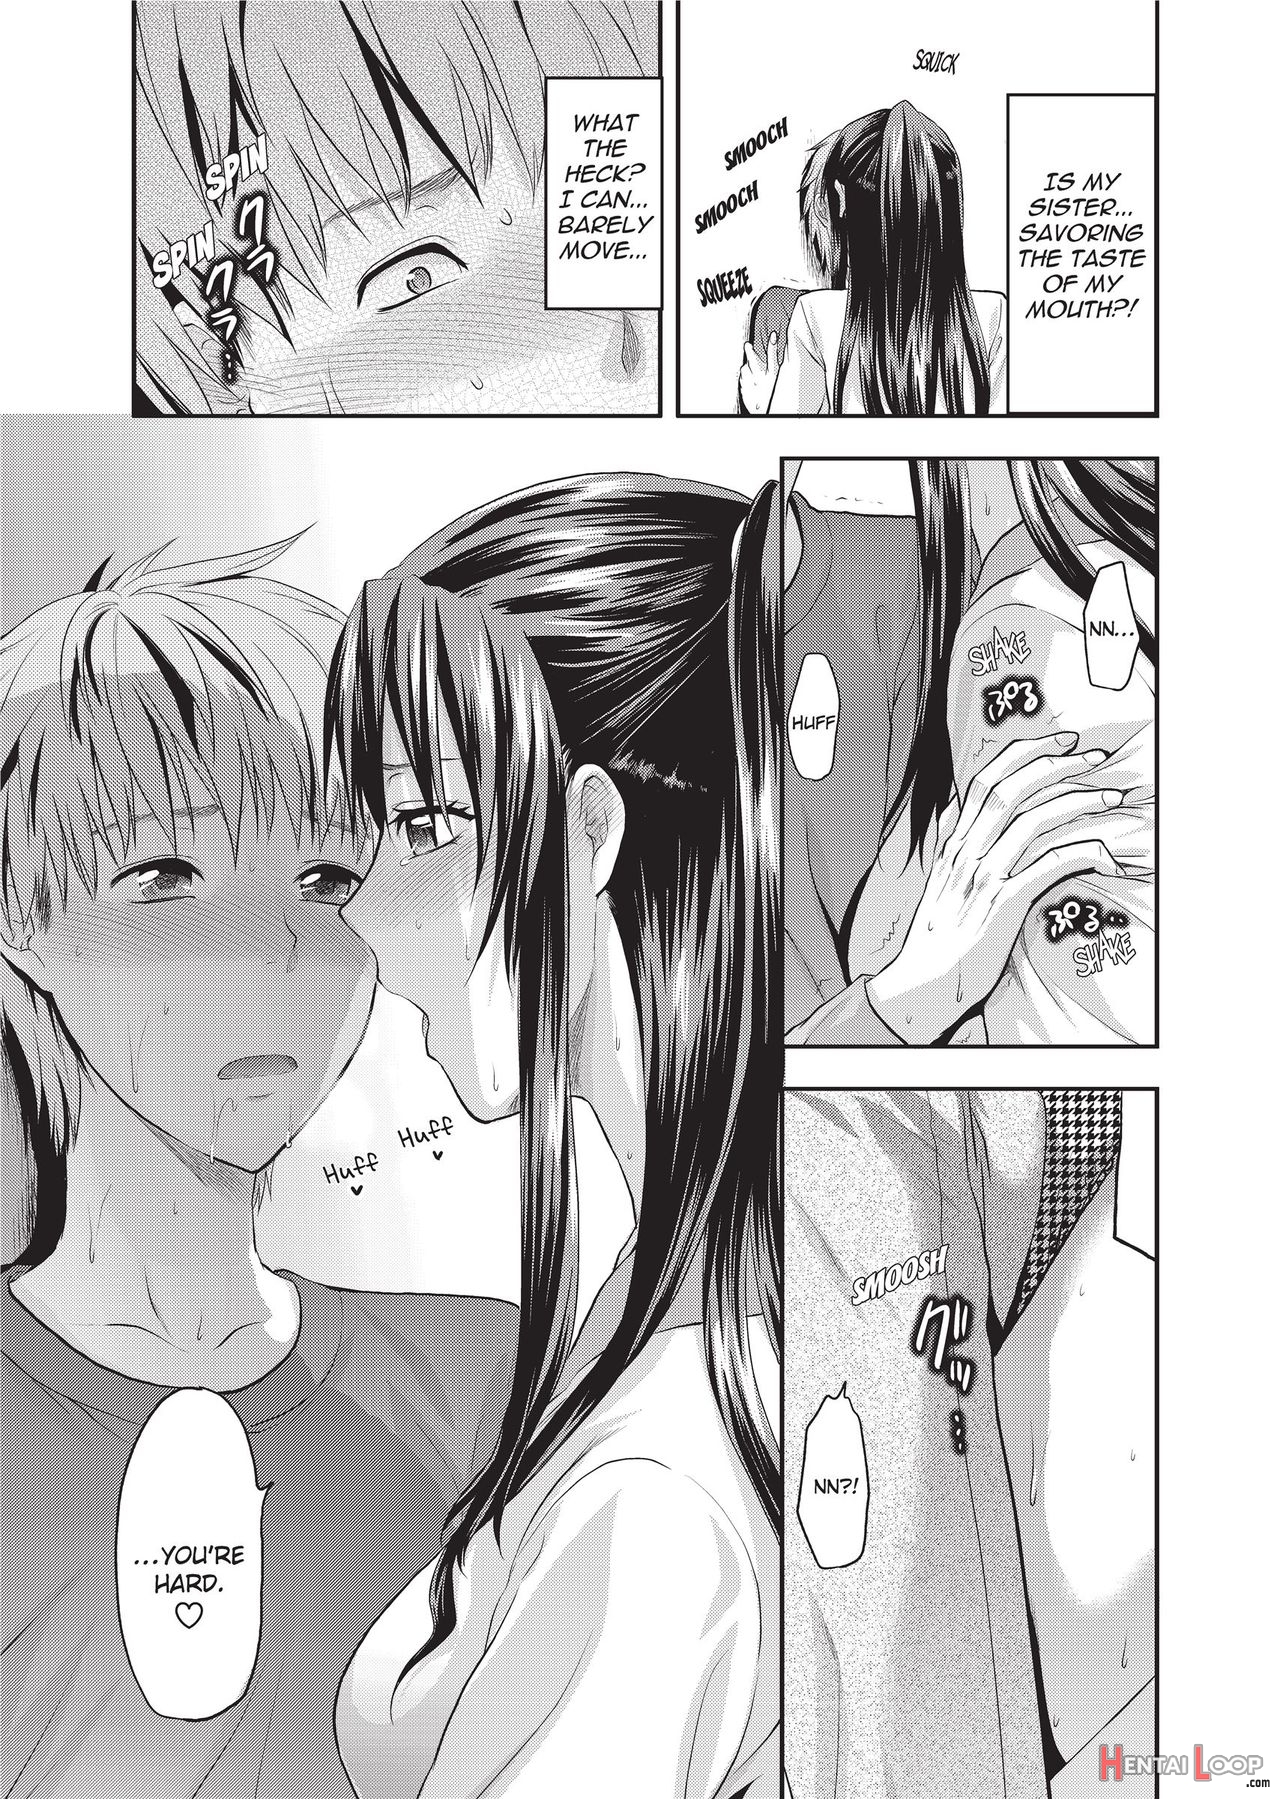 One Kore – Sweet Sister Selection page 54